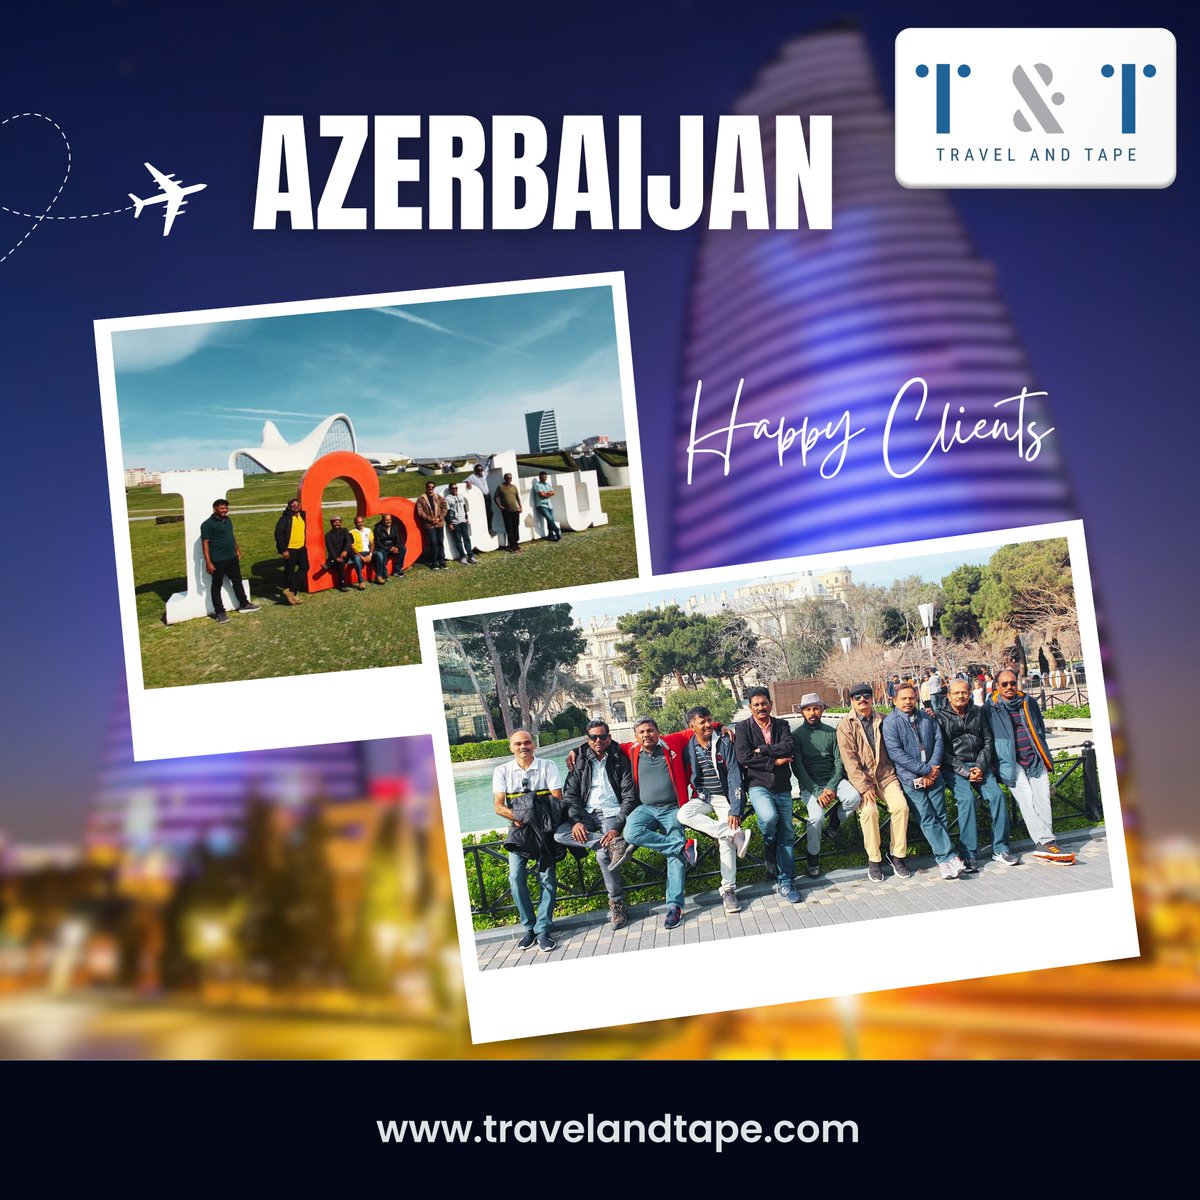 😊Happy Clients of Travel and Tape - Azerbaijan 
.
.
.
#azerbaijan #baku #happyclients #azerbaijantravel #clientdiares #happycustomer #clienreview #feedback #testimonials #clienttestimonial #trip #tourism #follow #travelandtape